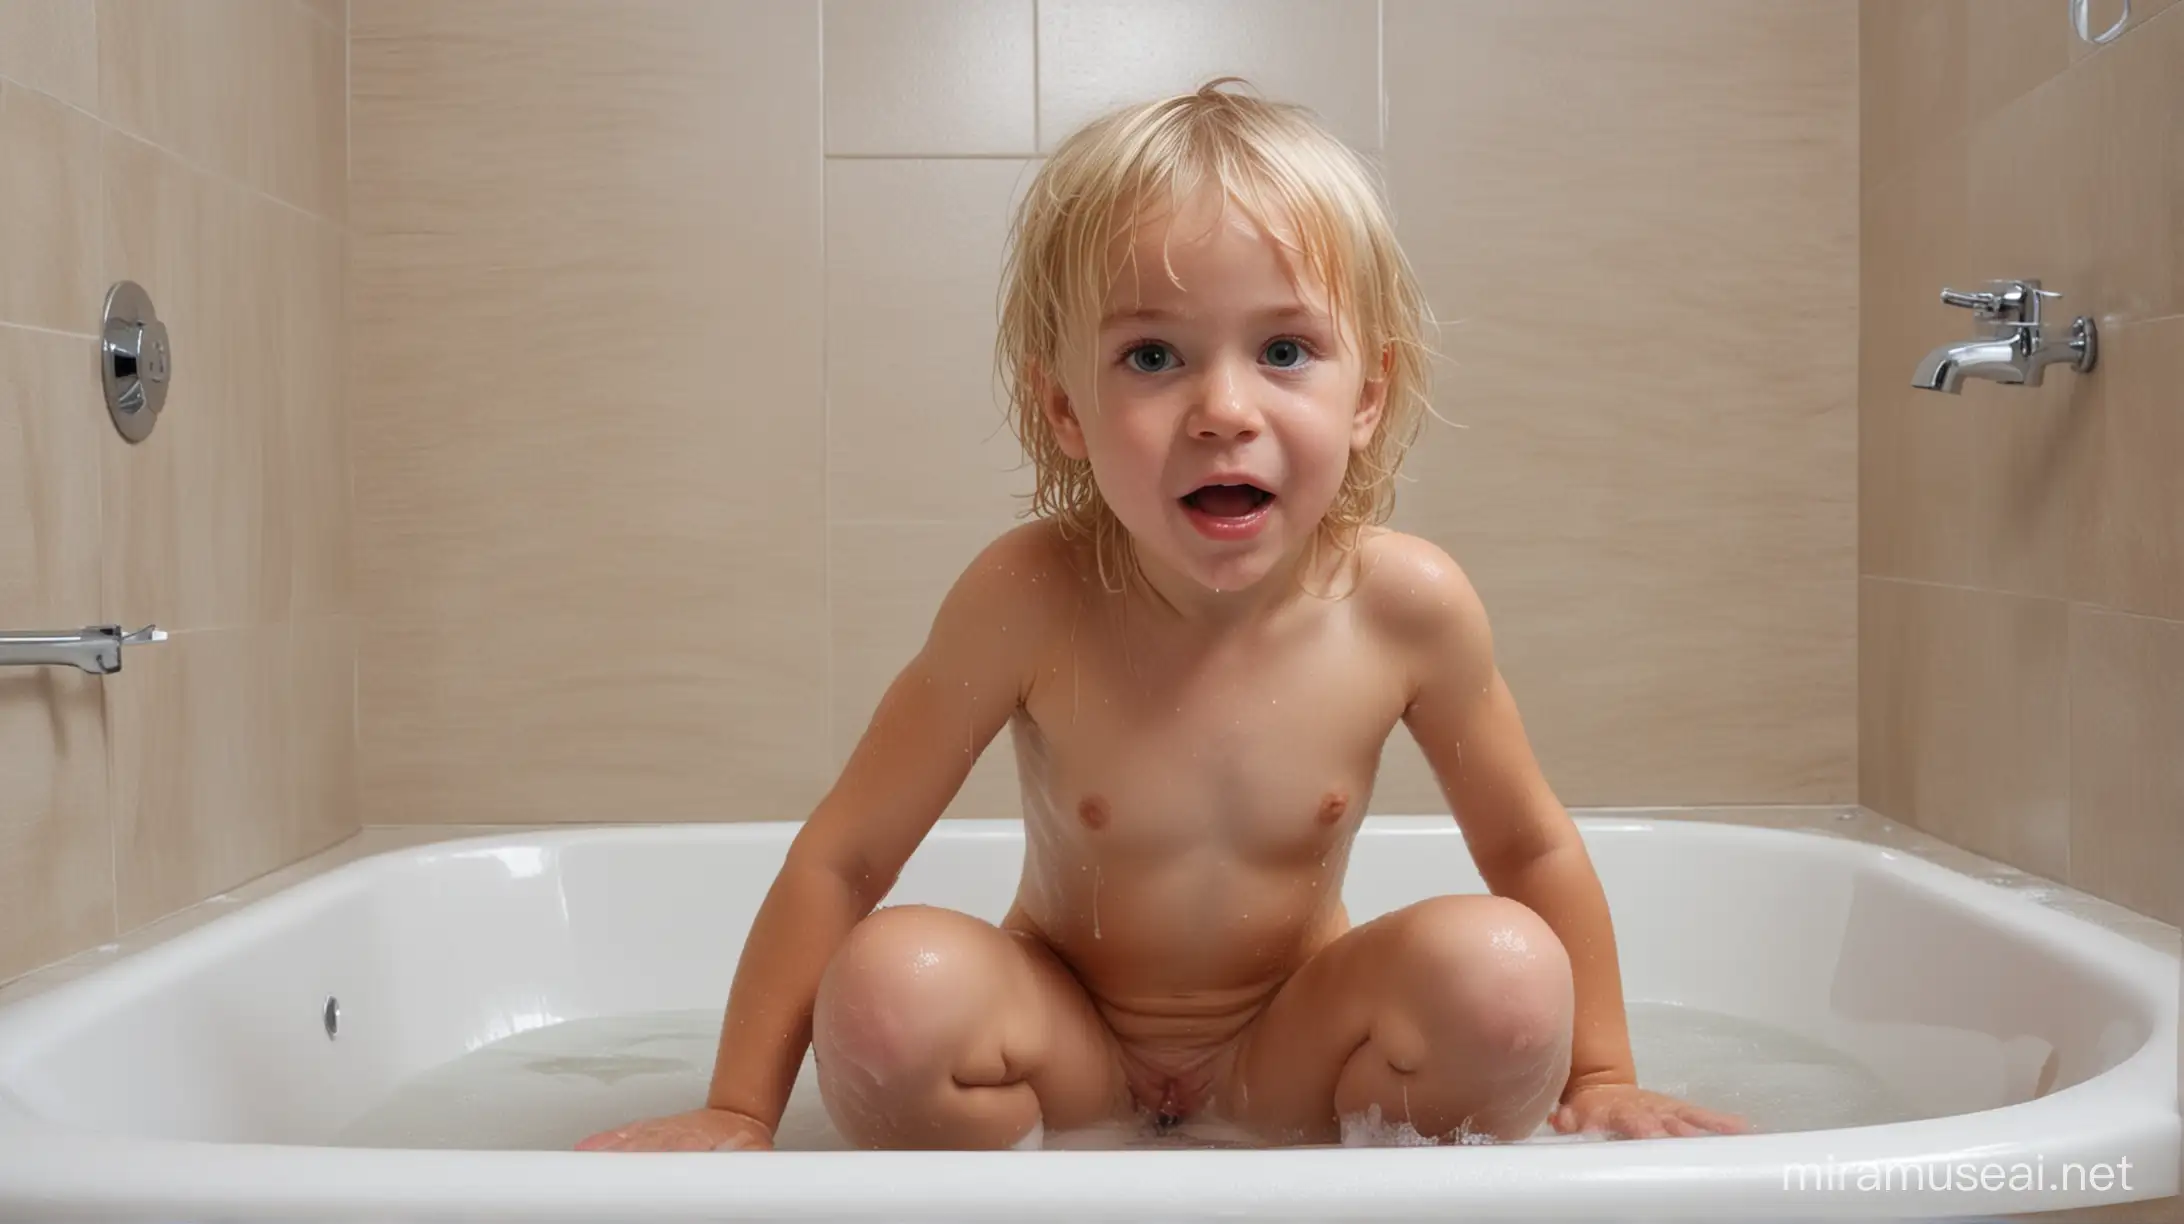 Little blonde kid, naked, wet in Bath, siitting spread legs, front view